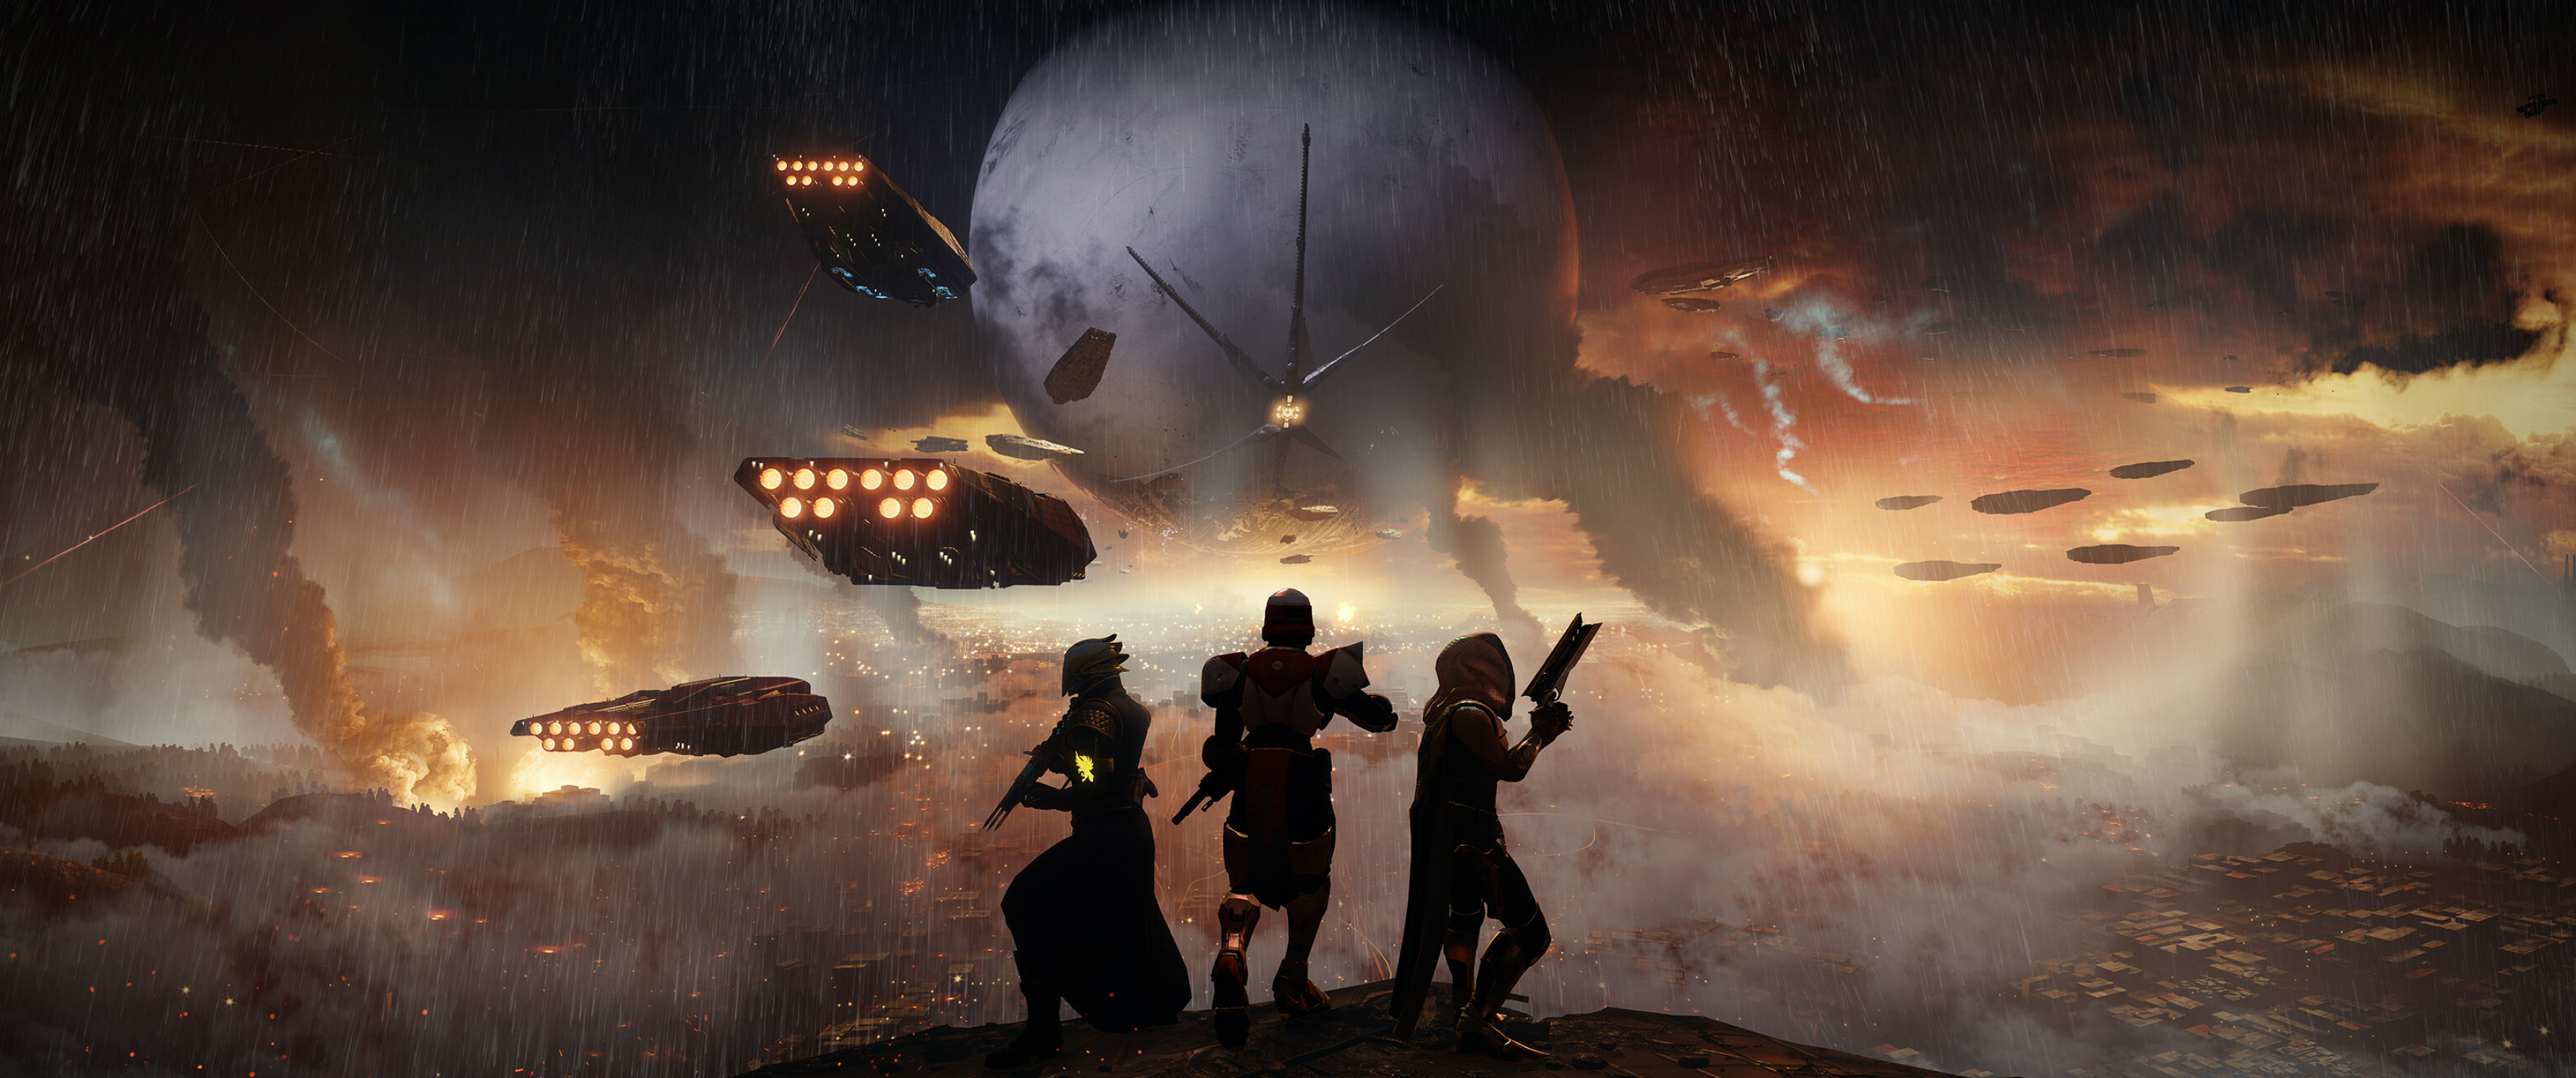 Destiny: It sold over US$325 million at retail in its first five days, making it the biggest new franchise launch of all time, Online video game. 3440x1440 Dual Screen Background.